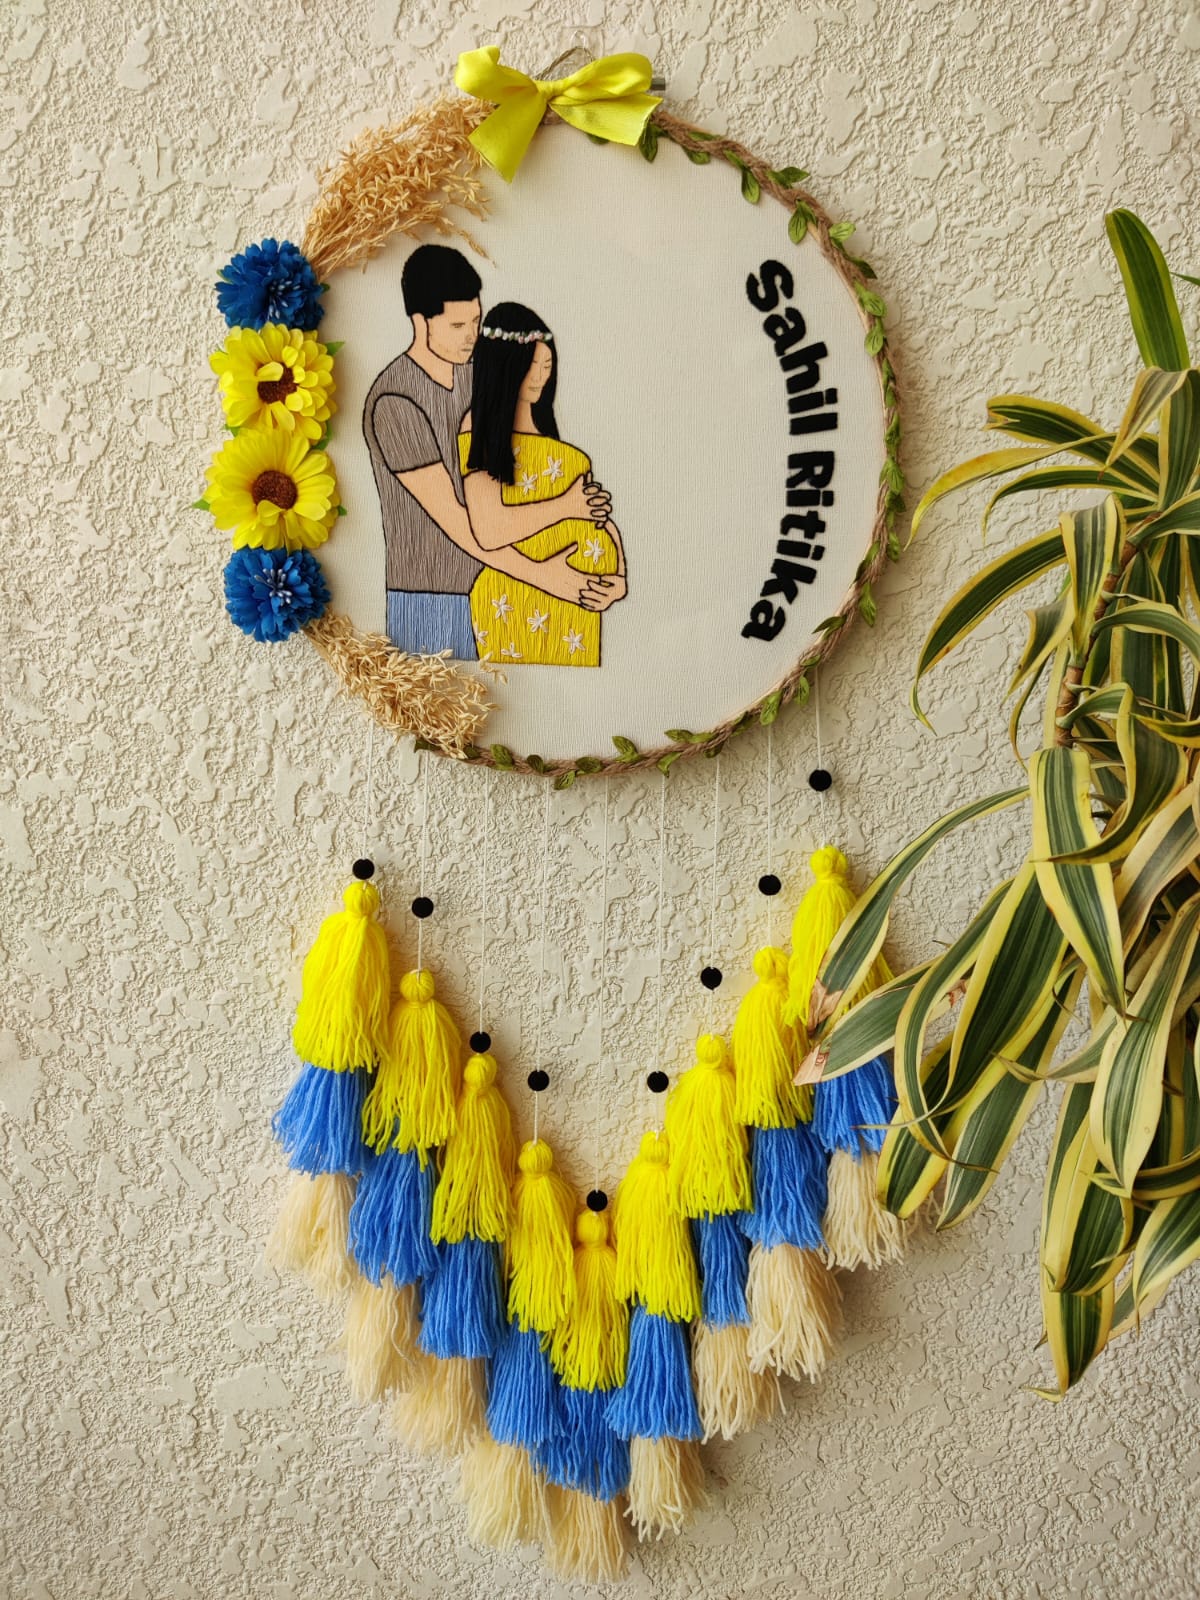 Expecting Couple Embroidered Hoop with Tassels